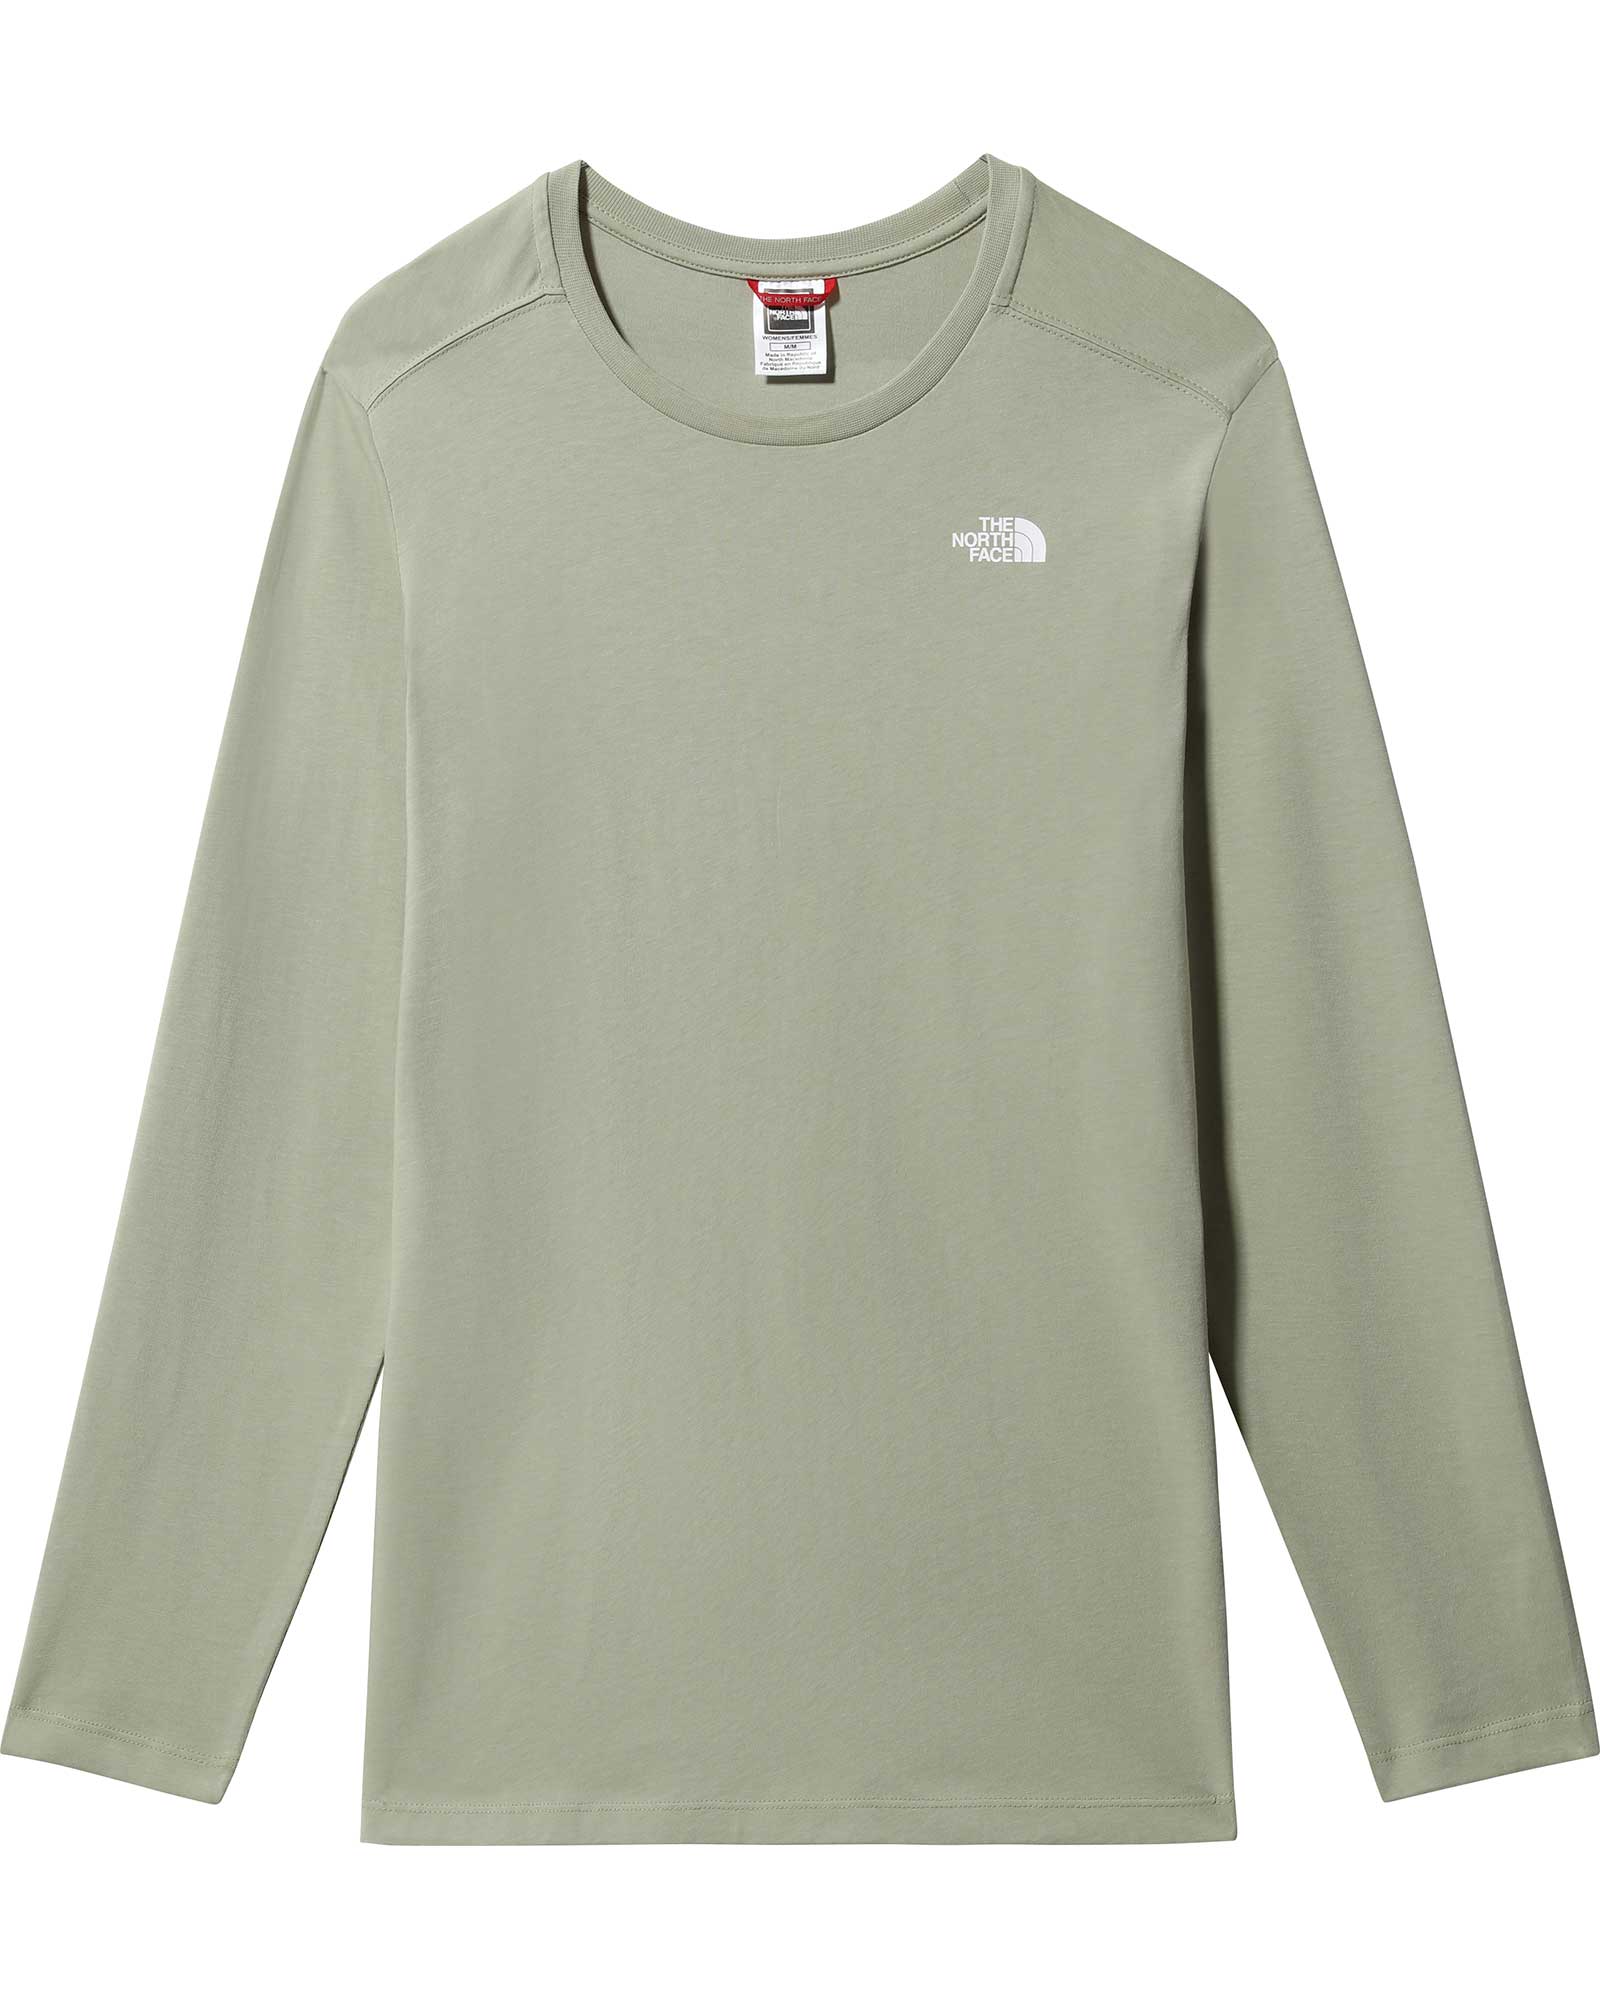 The North Face Simple Dome Women’s Long Sleeve T Shirt - Tea Green S